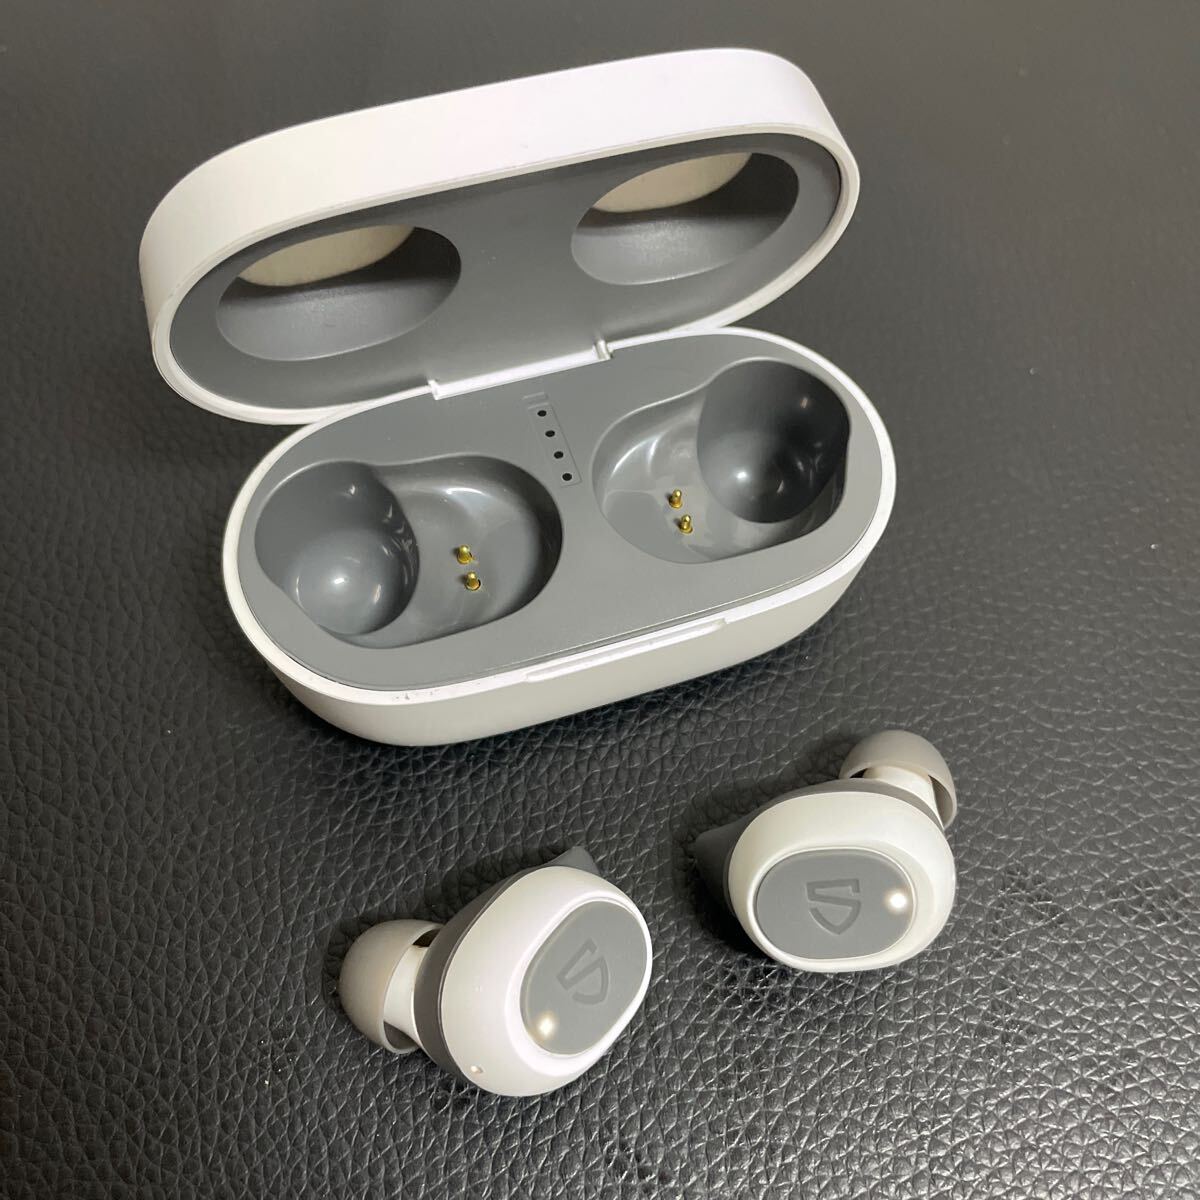  wireless earphone Bluetooth anchor anker a3939 sol republic SOL AMPS AIR ep1190 soundpeats together earphone 